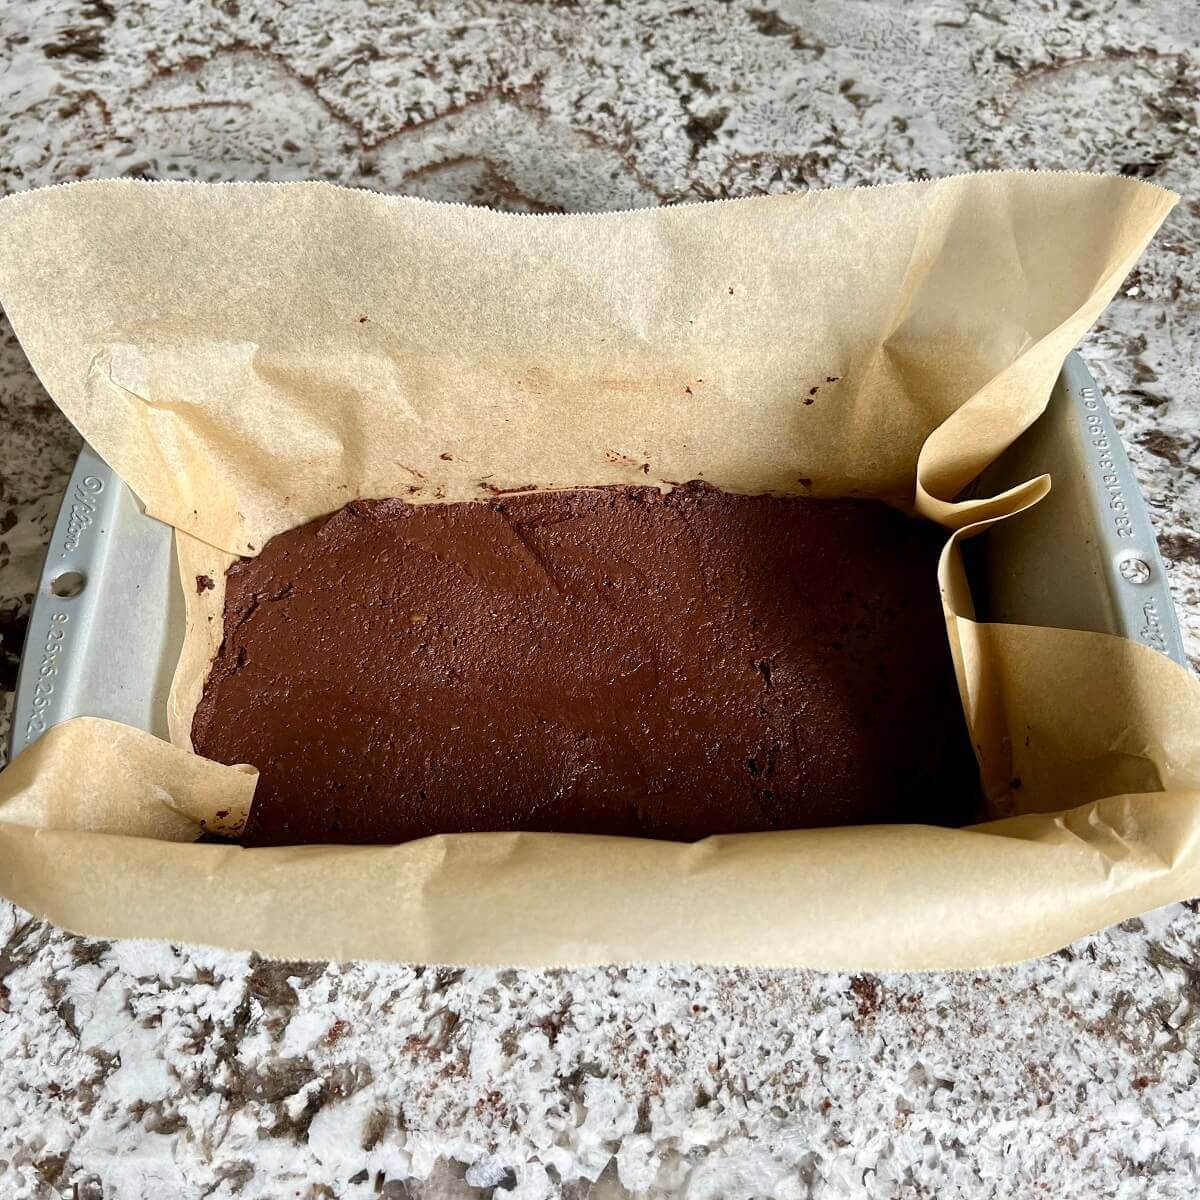 Fudge in a loaf pan lined with parchment paper.